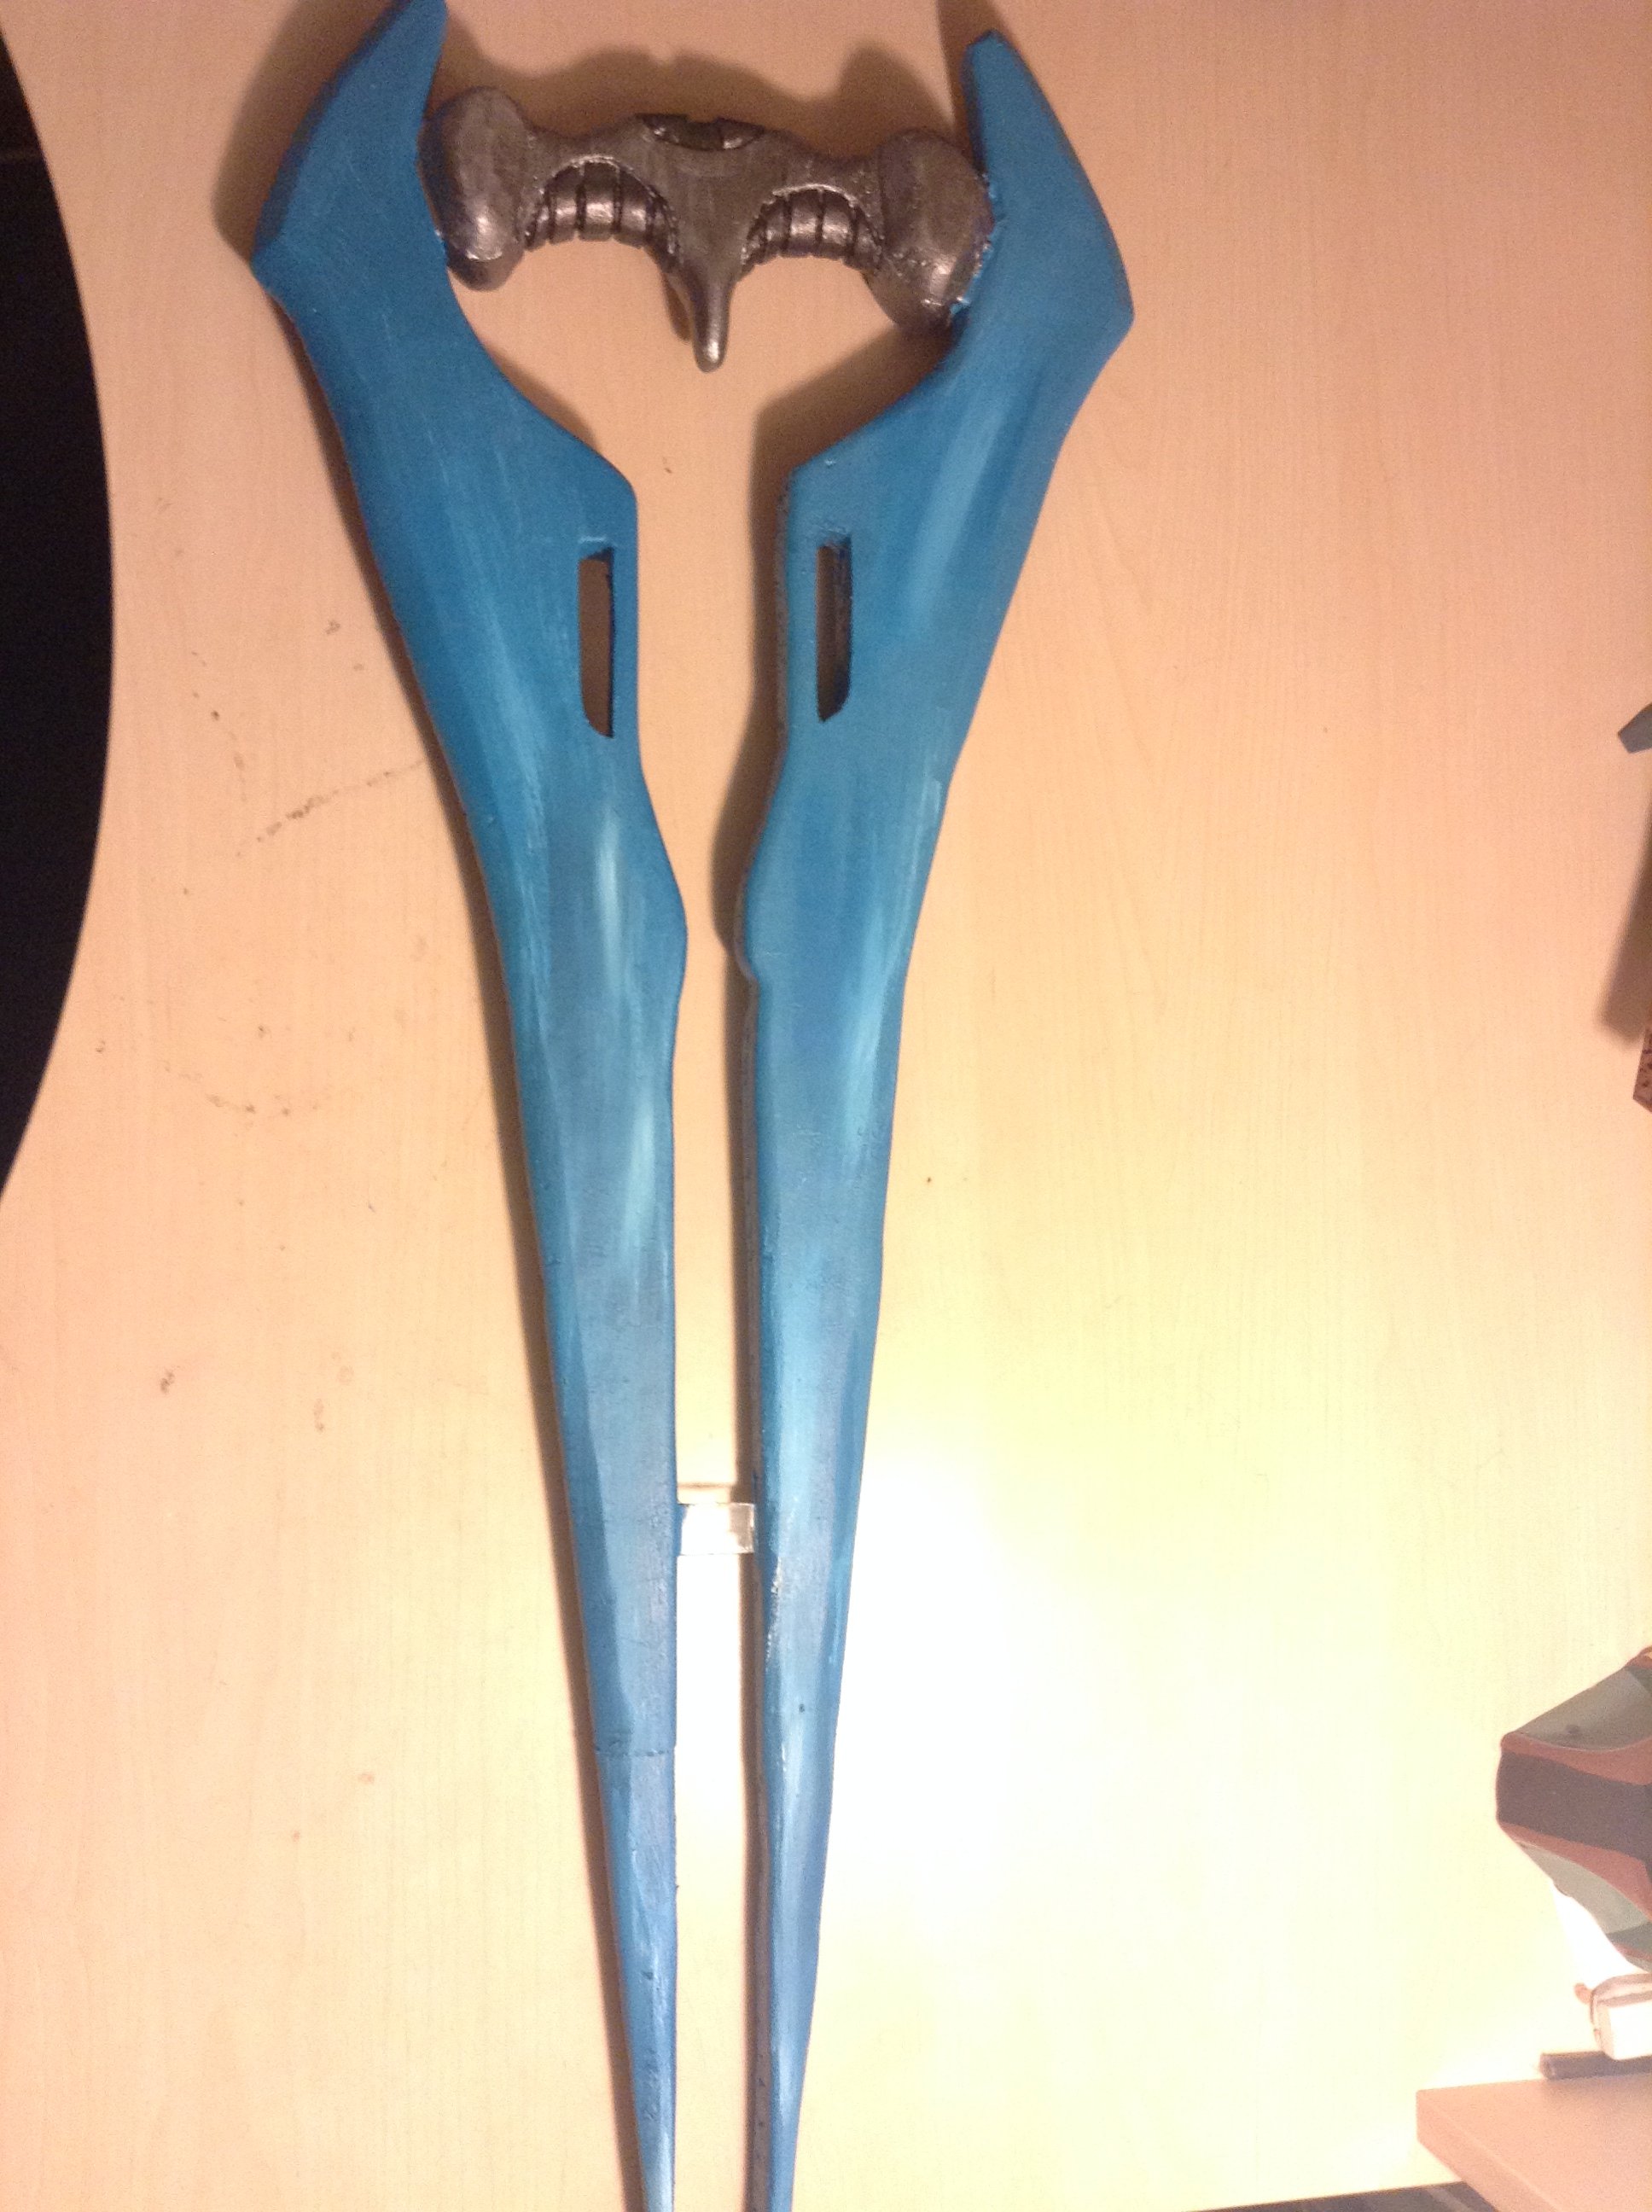 My Halo 4 energy sword | Halo Costume and Prop Maker Community - 405th